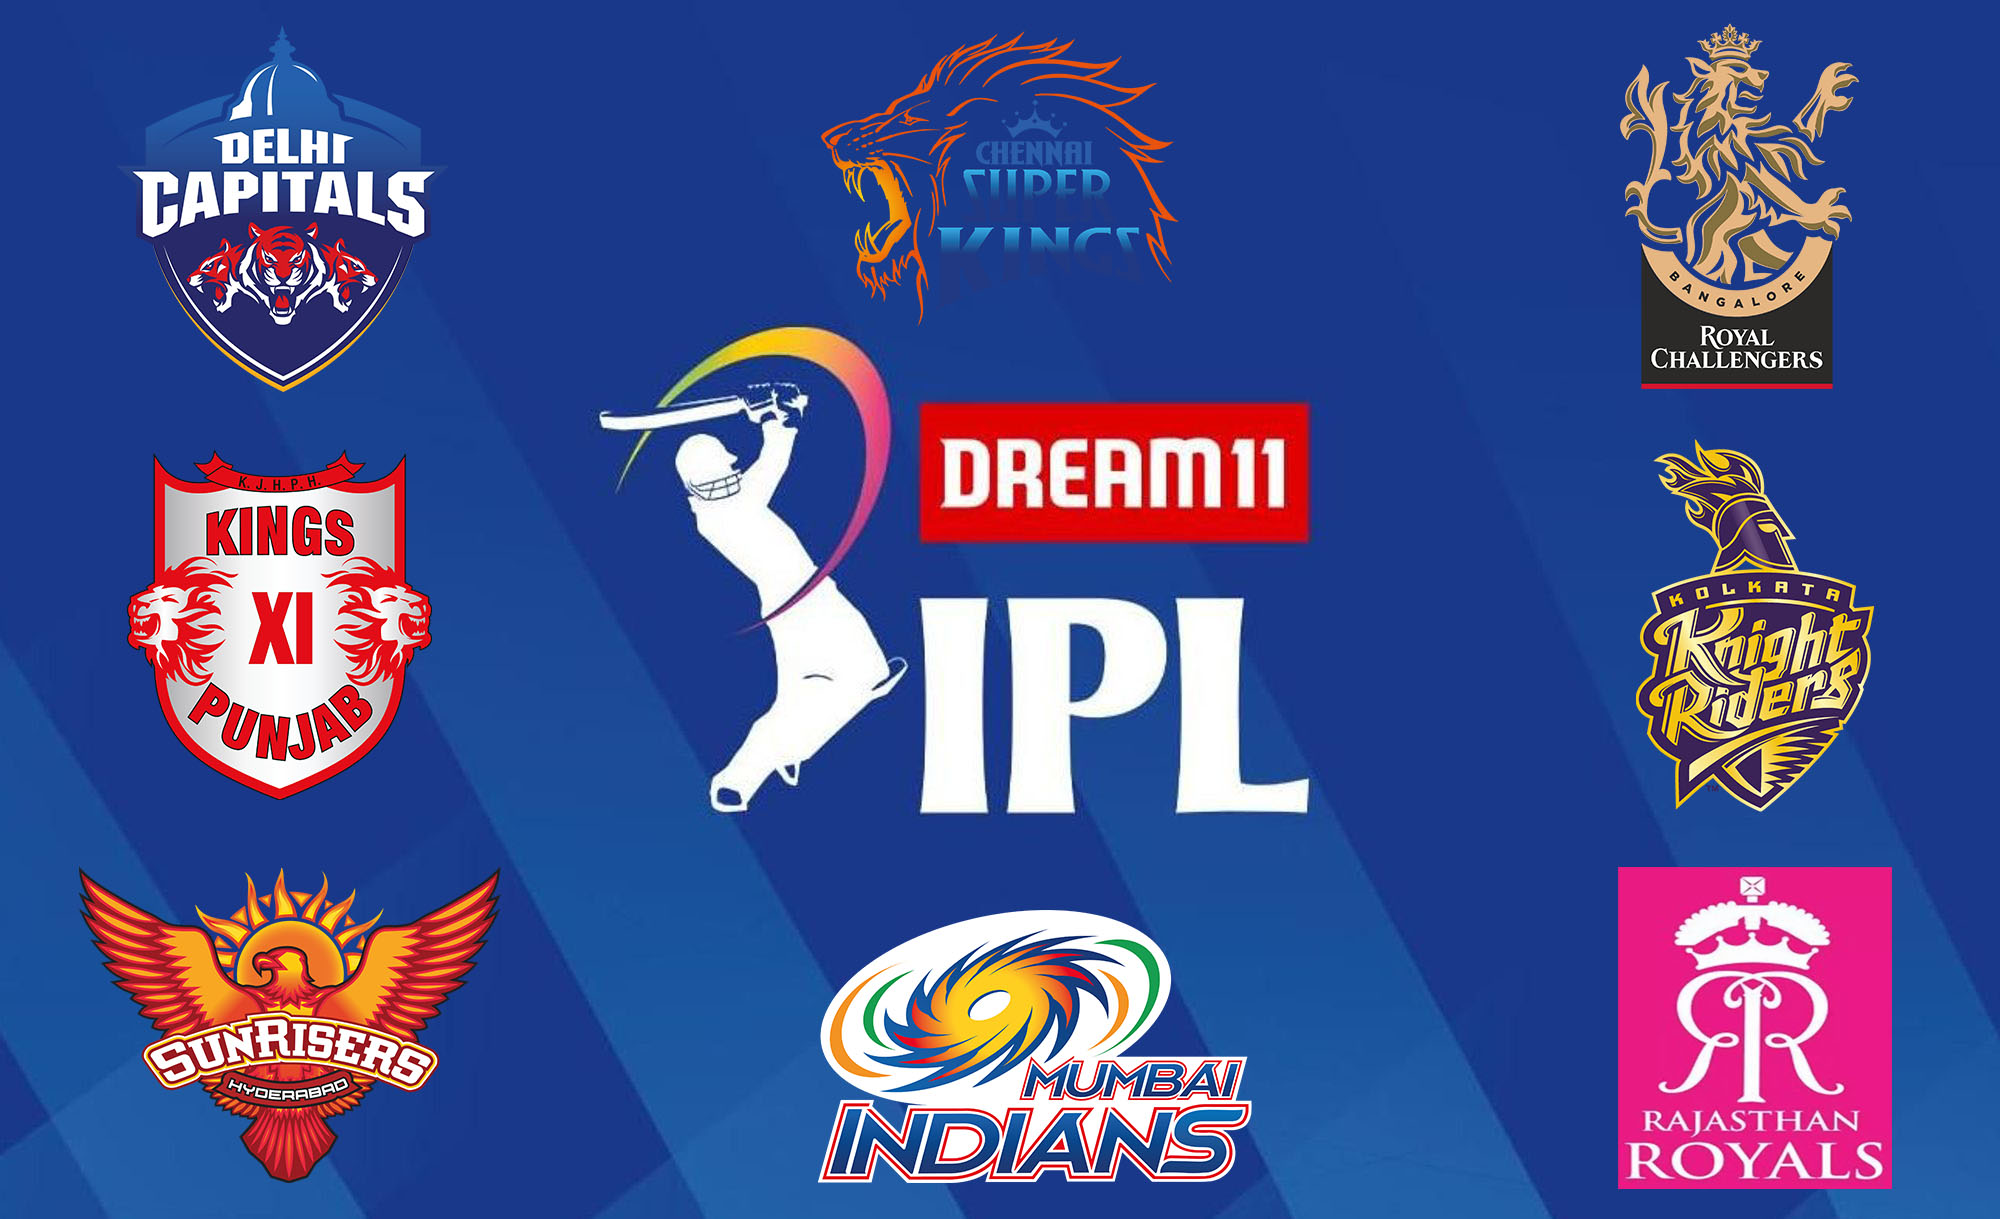 Indian Premier League Most valuable cricket league in the world? The